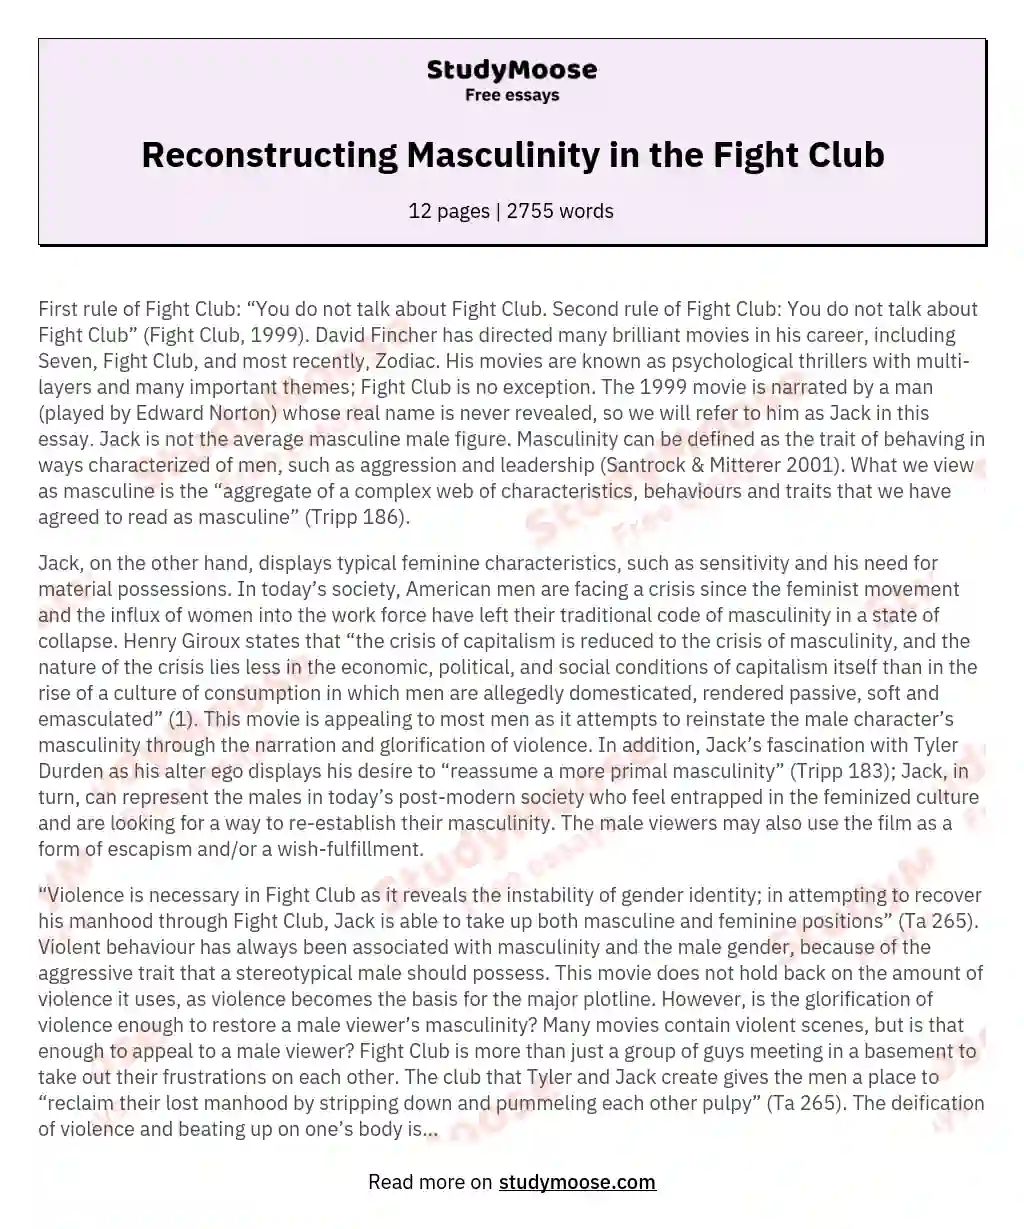 Reconstructing Masculinity in the Fight Club